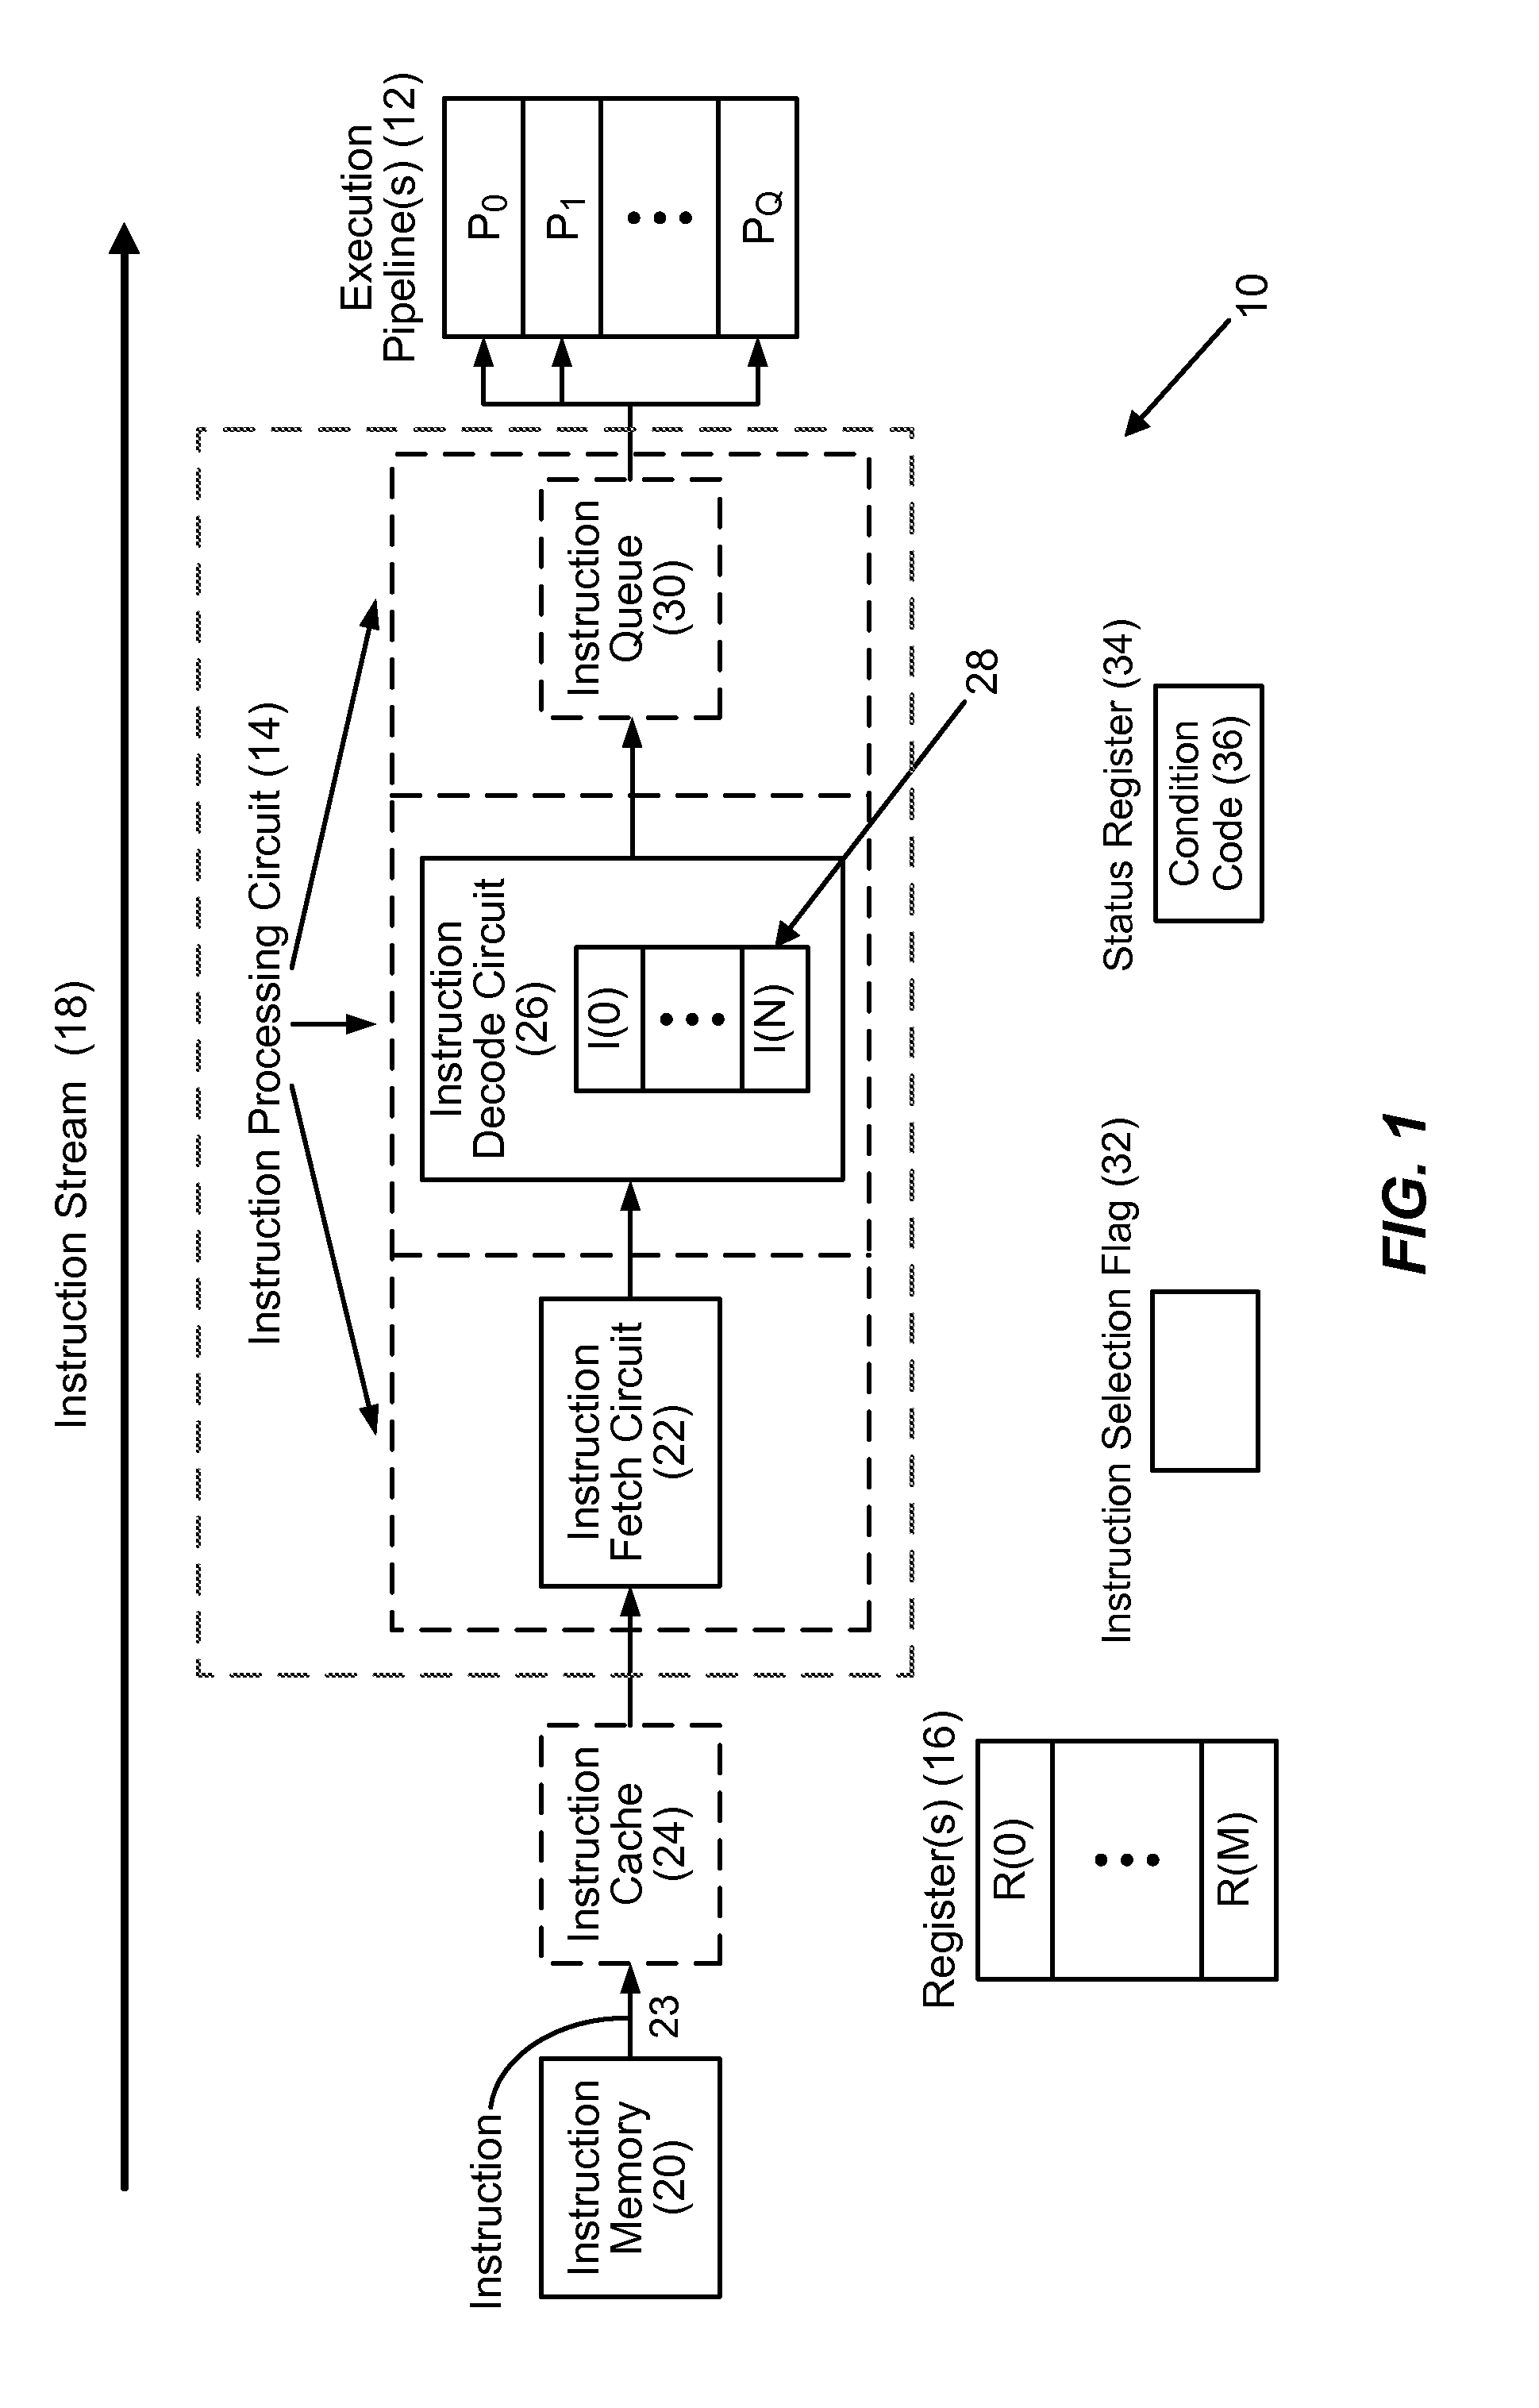 Fusing conditional write instructions having opposite conditions in instruction processing circuits, and related processor systems, methods, and computer-readable media